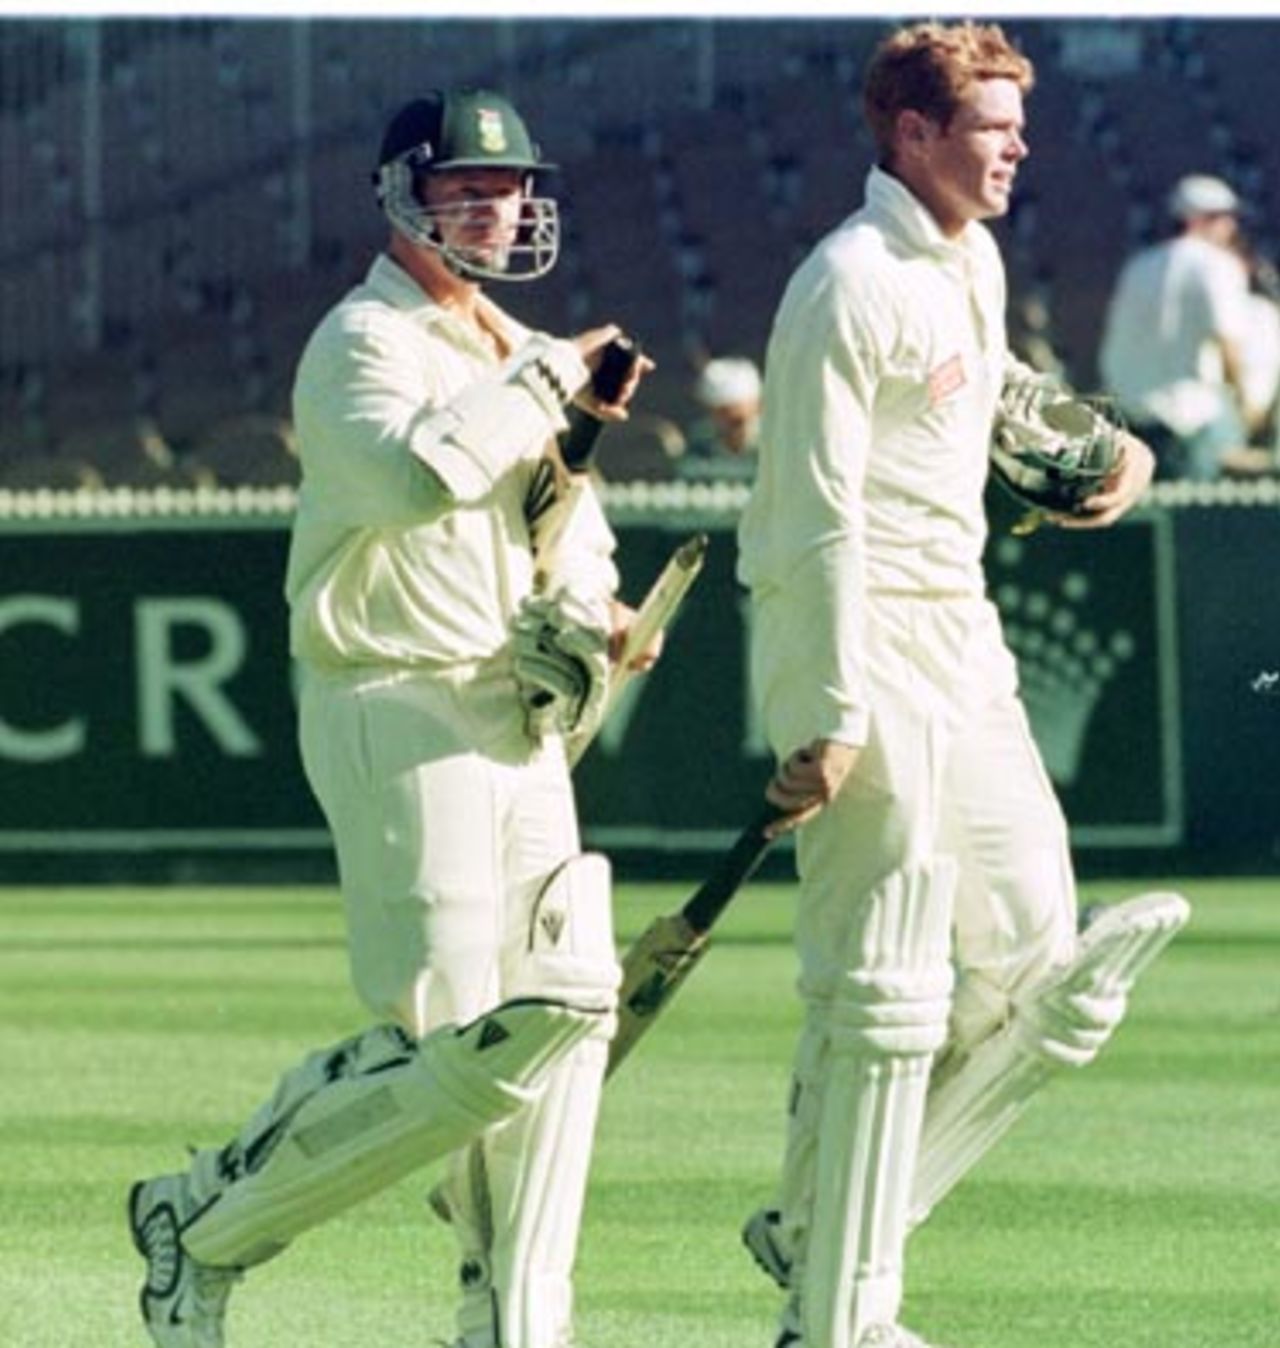 Lance Klusener and Shaun Pollock walk off after drawing the match at the end of the final day of the Australia v South Africa Test match at the MCG in Melbourne. December 30th 1997.